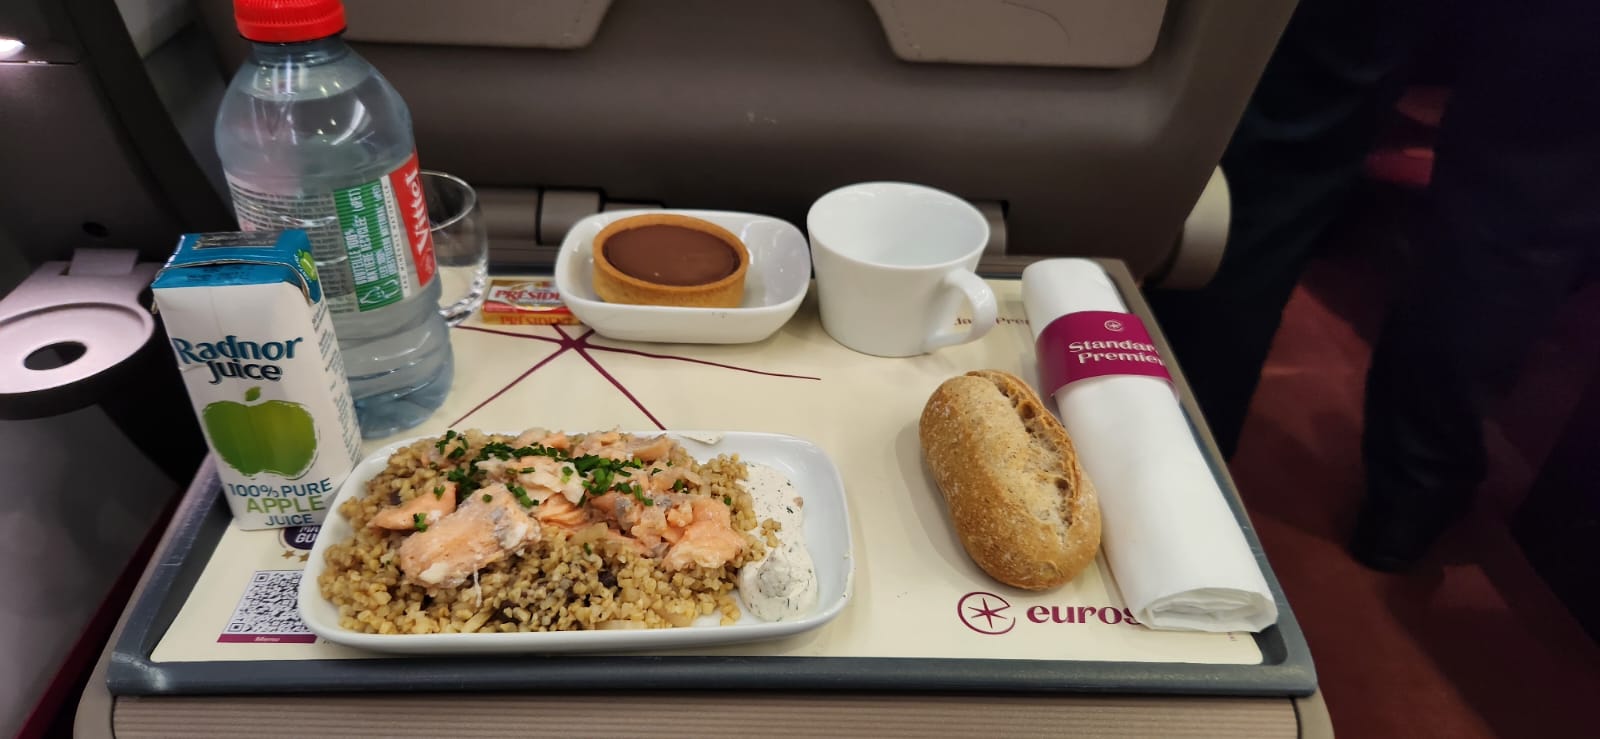 A meal on board Eurostar Standard Premier. There is a water bottle, apple juice, a salmon salad, a bread roll, a chocolate tart and a hot drink.